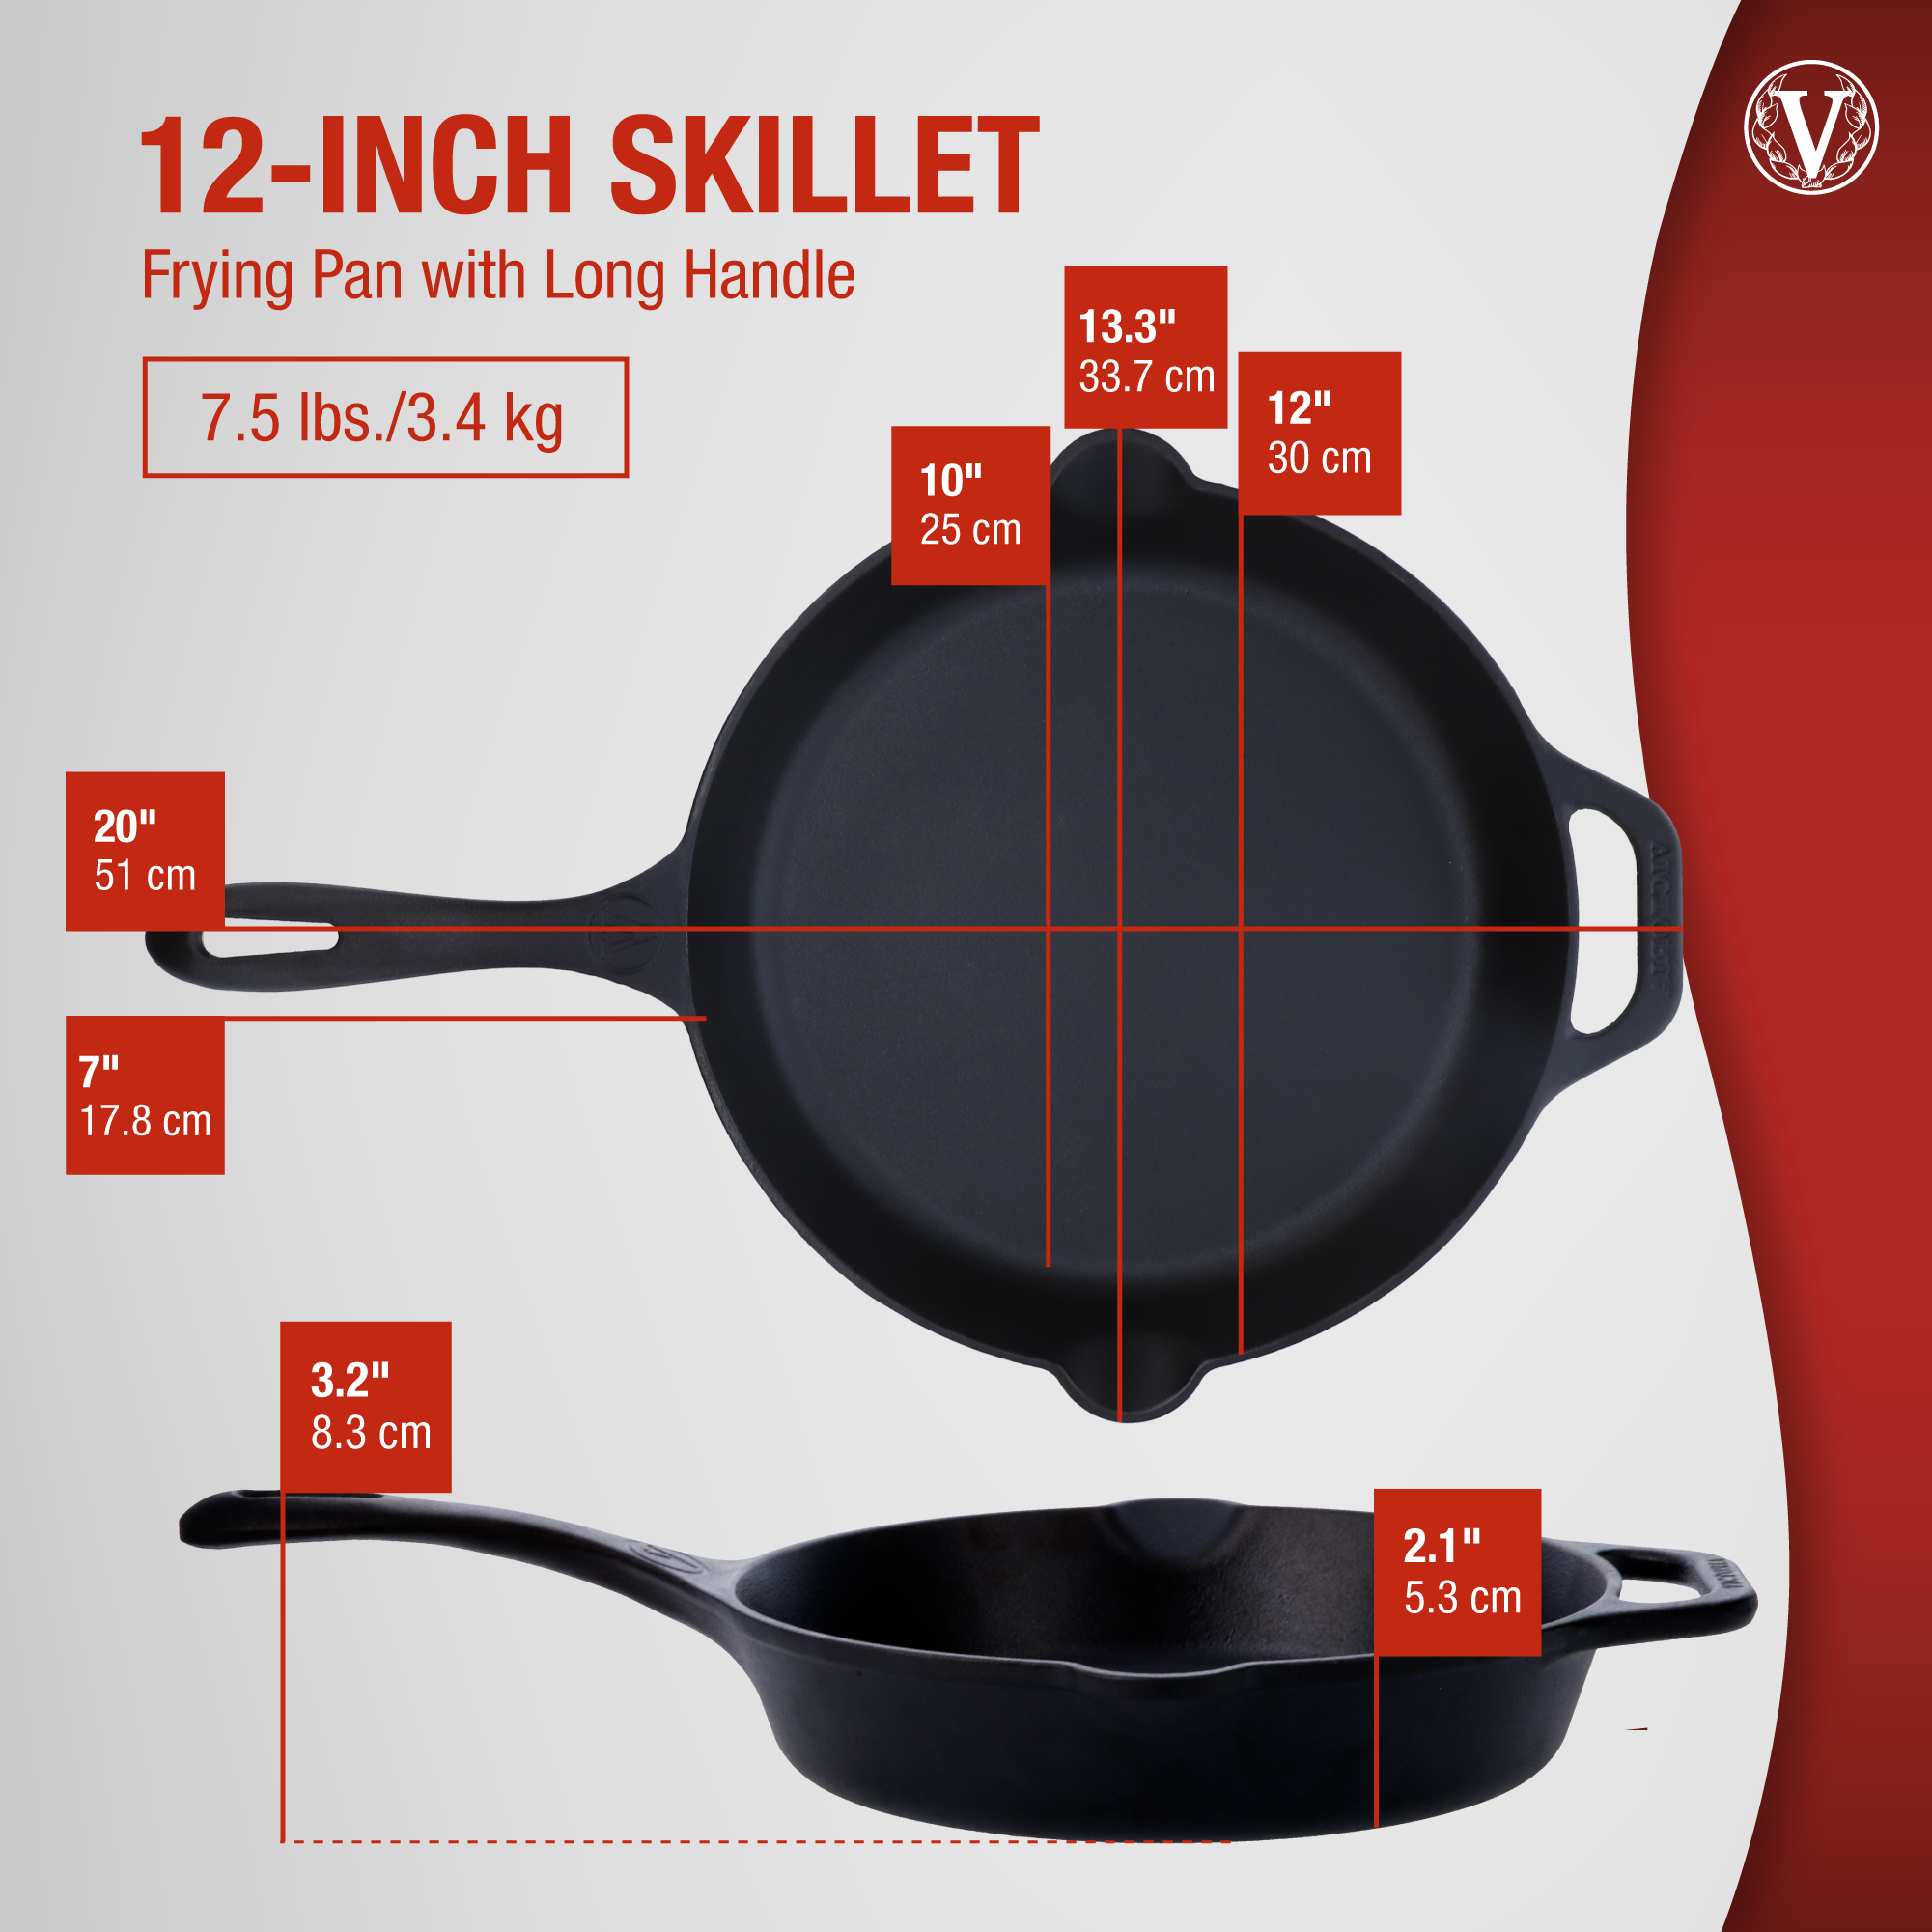 Victoria Cast Iron Skillet, Pre-Seasoned Cast-Iron Frying Pan with Long Handle, Made in Colombia, 12 Inch - image 5 of 5